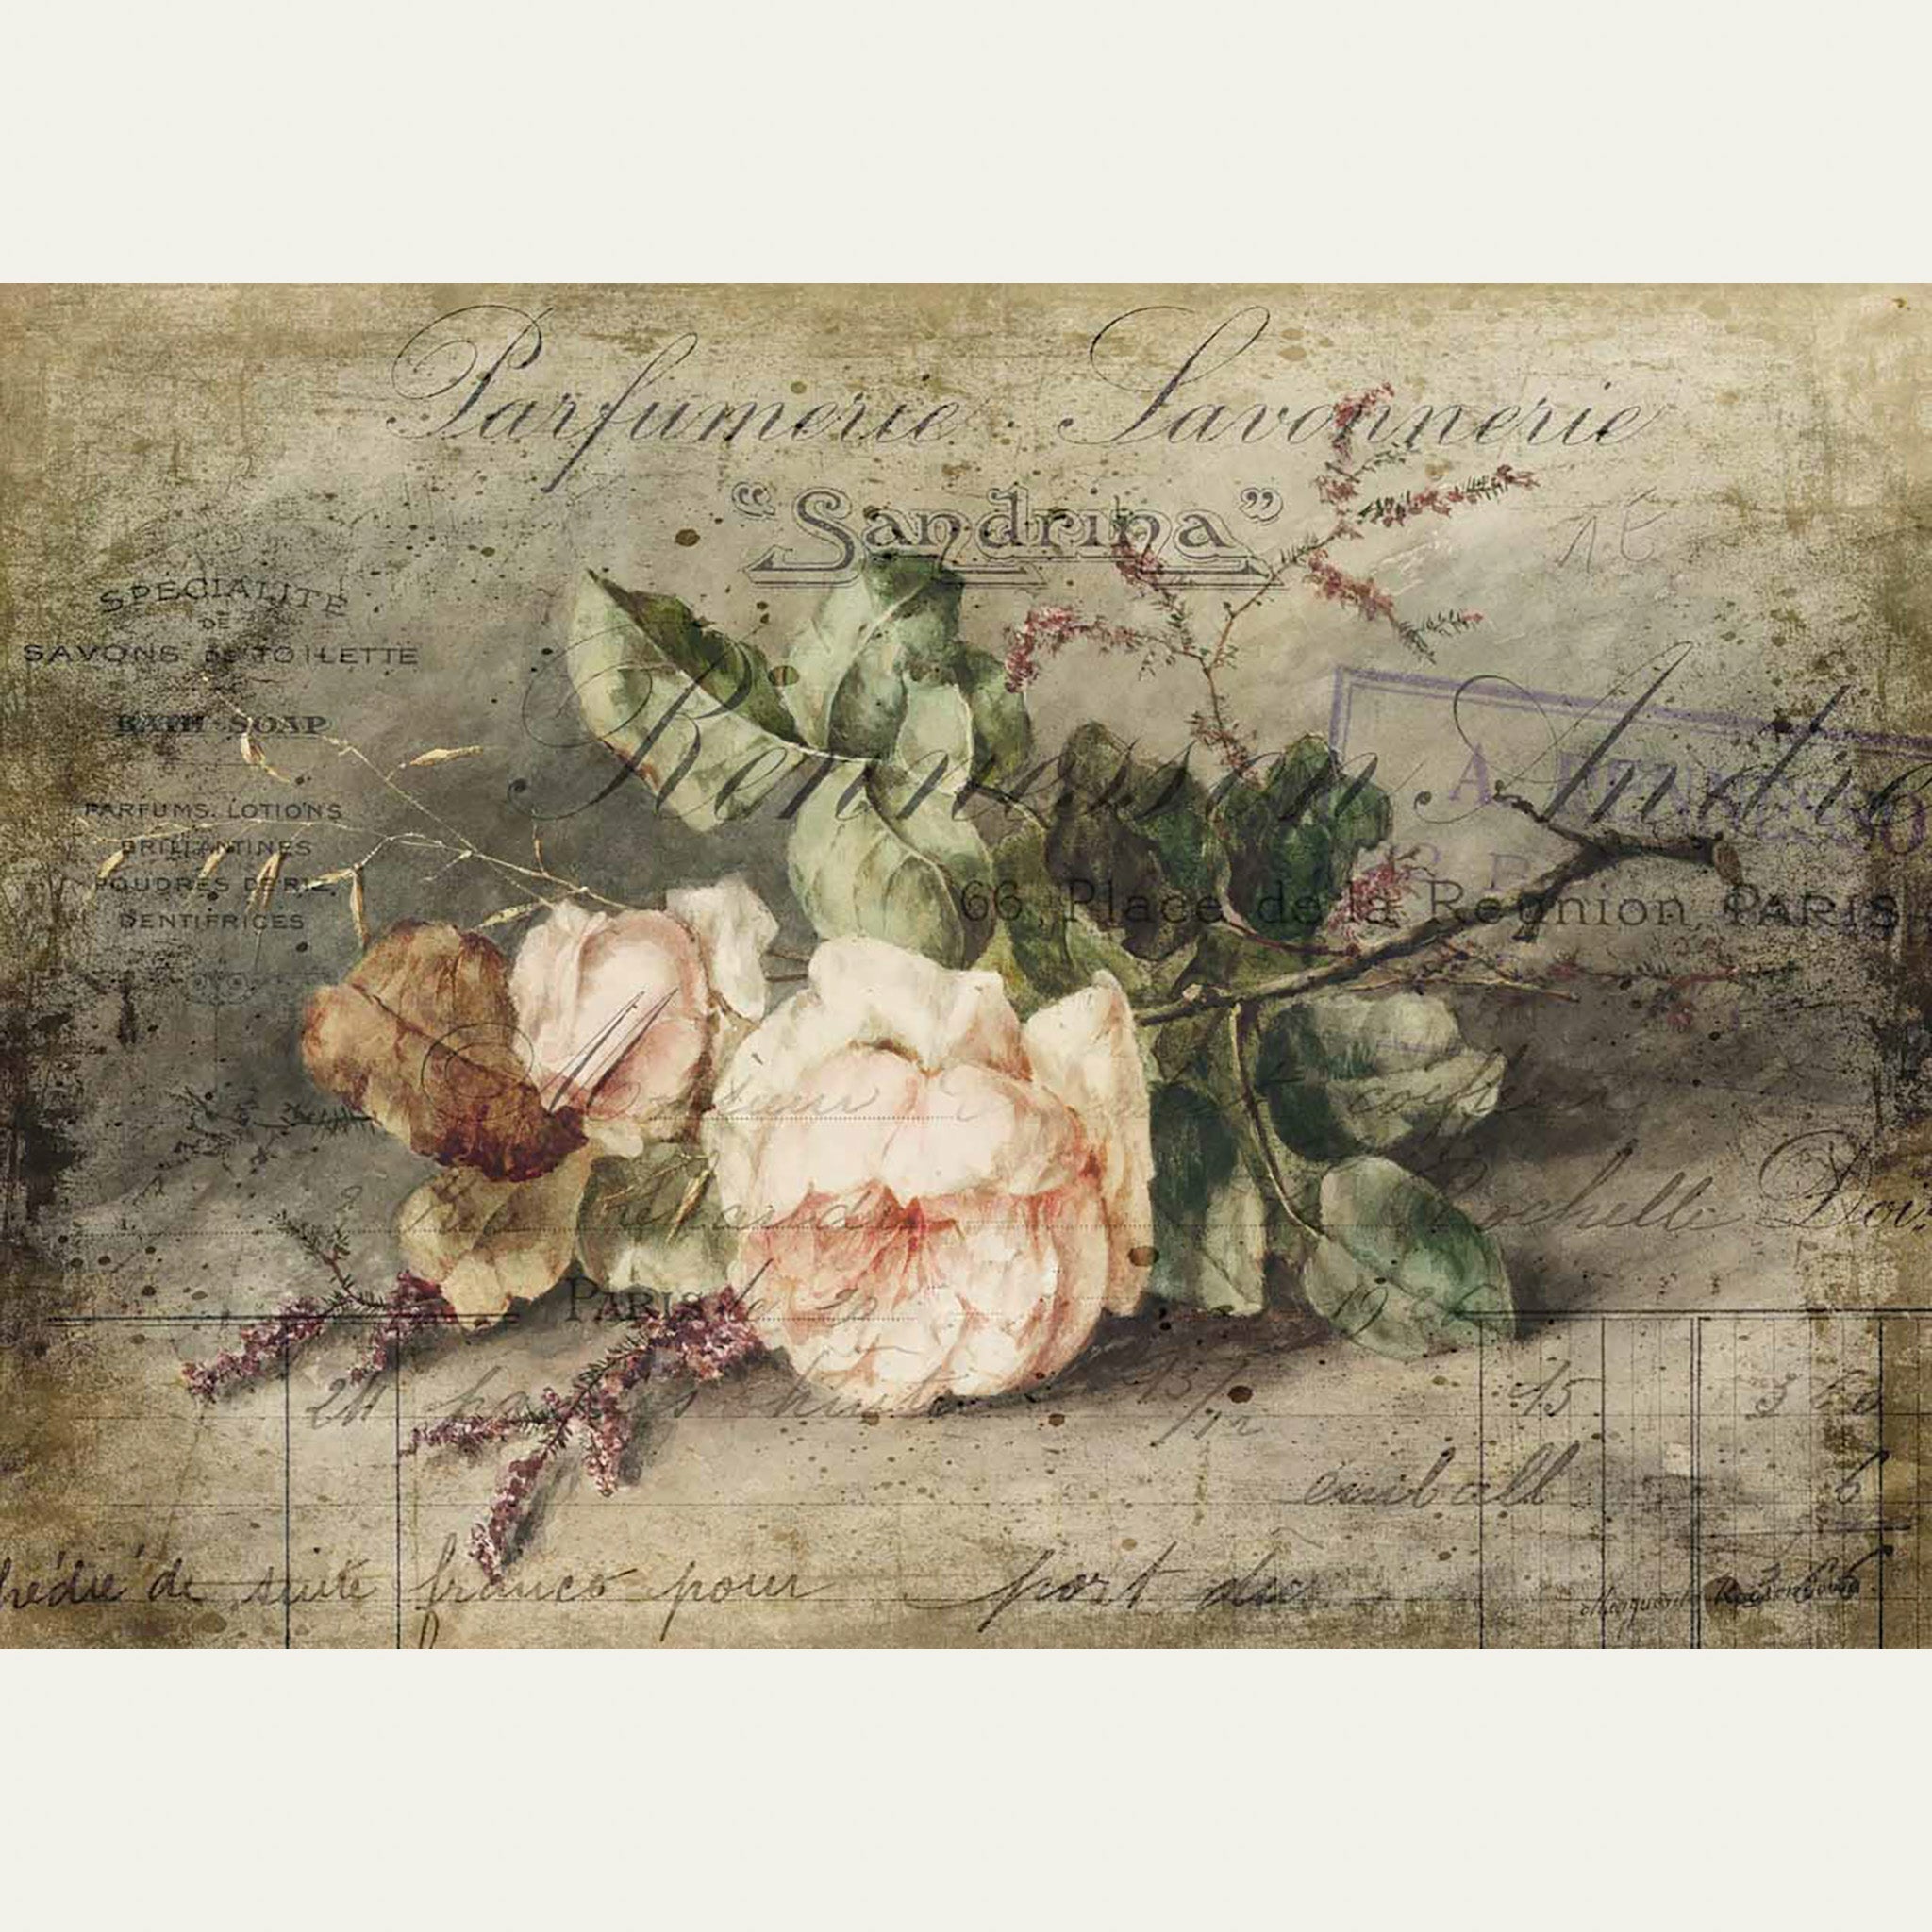 A4 rice paper design of vintage parchment with pink roses on a table. White borders are on the top and bottom.